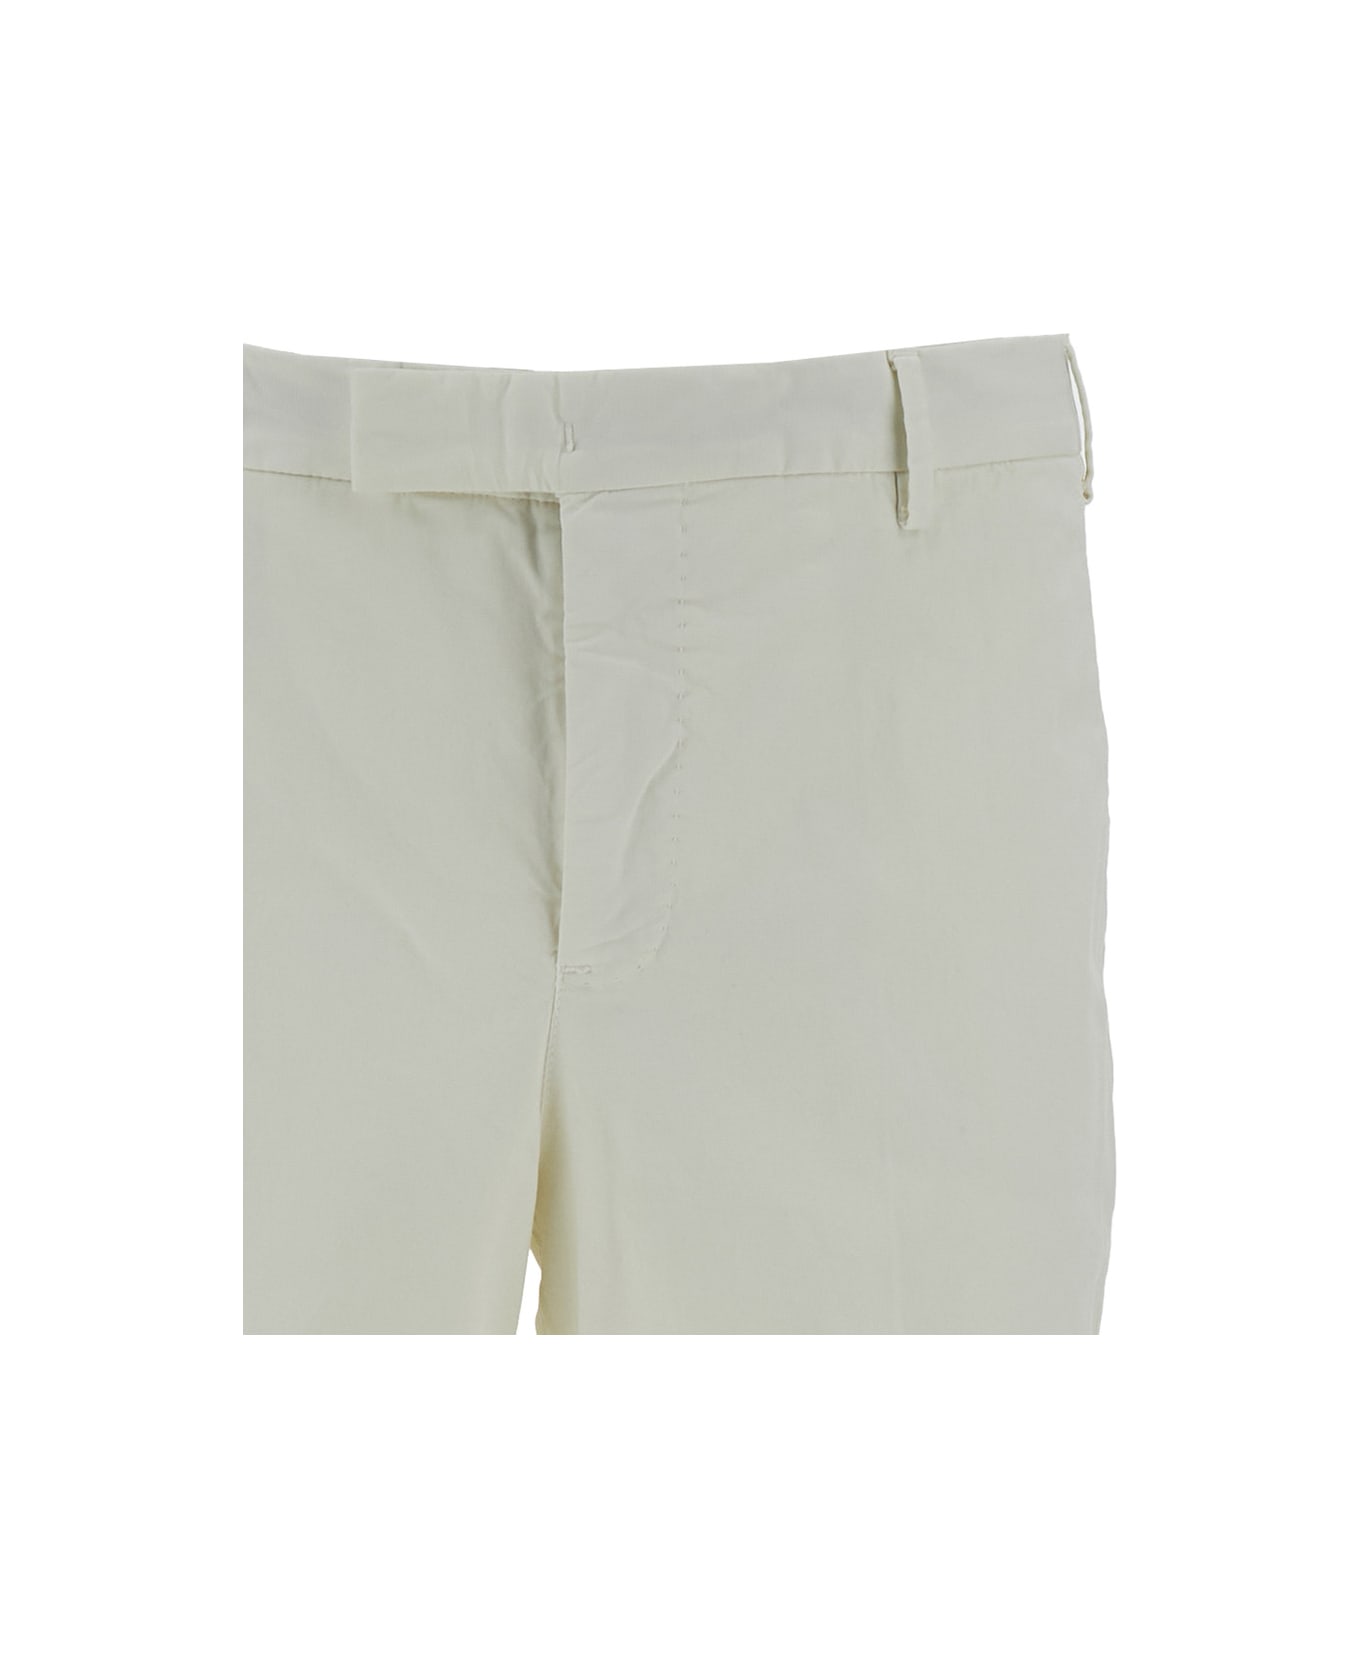 PT Torino Sartorial Slim Fit White Trousers In Cotton Blend Man - White ボトムス